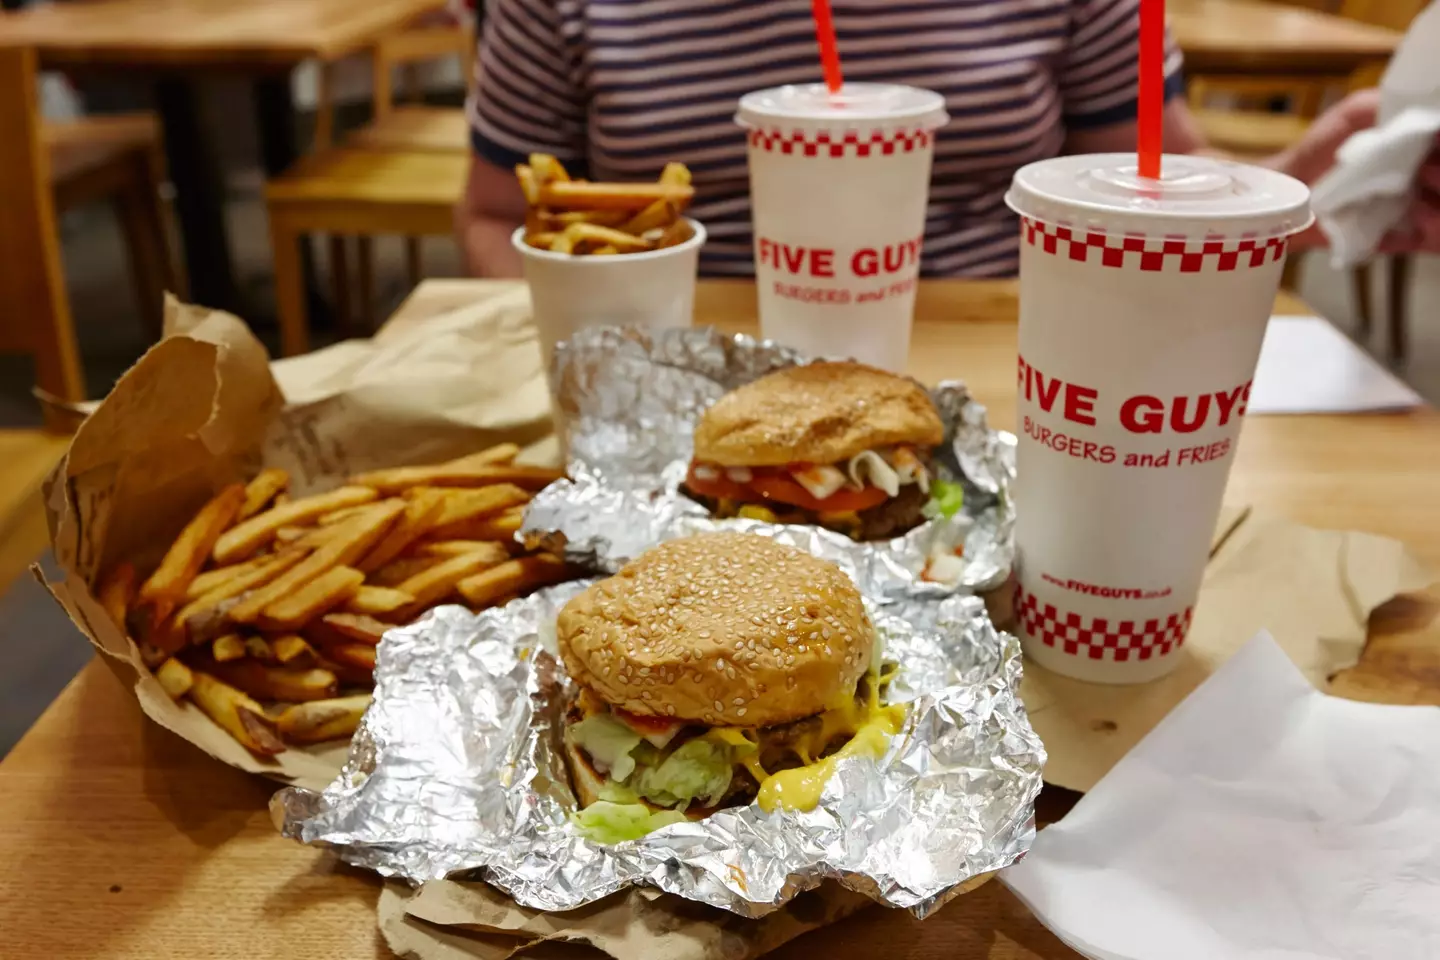 Do you think Five Guys is worth the price?